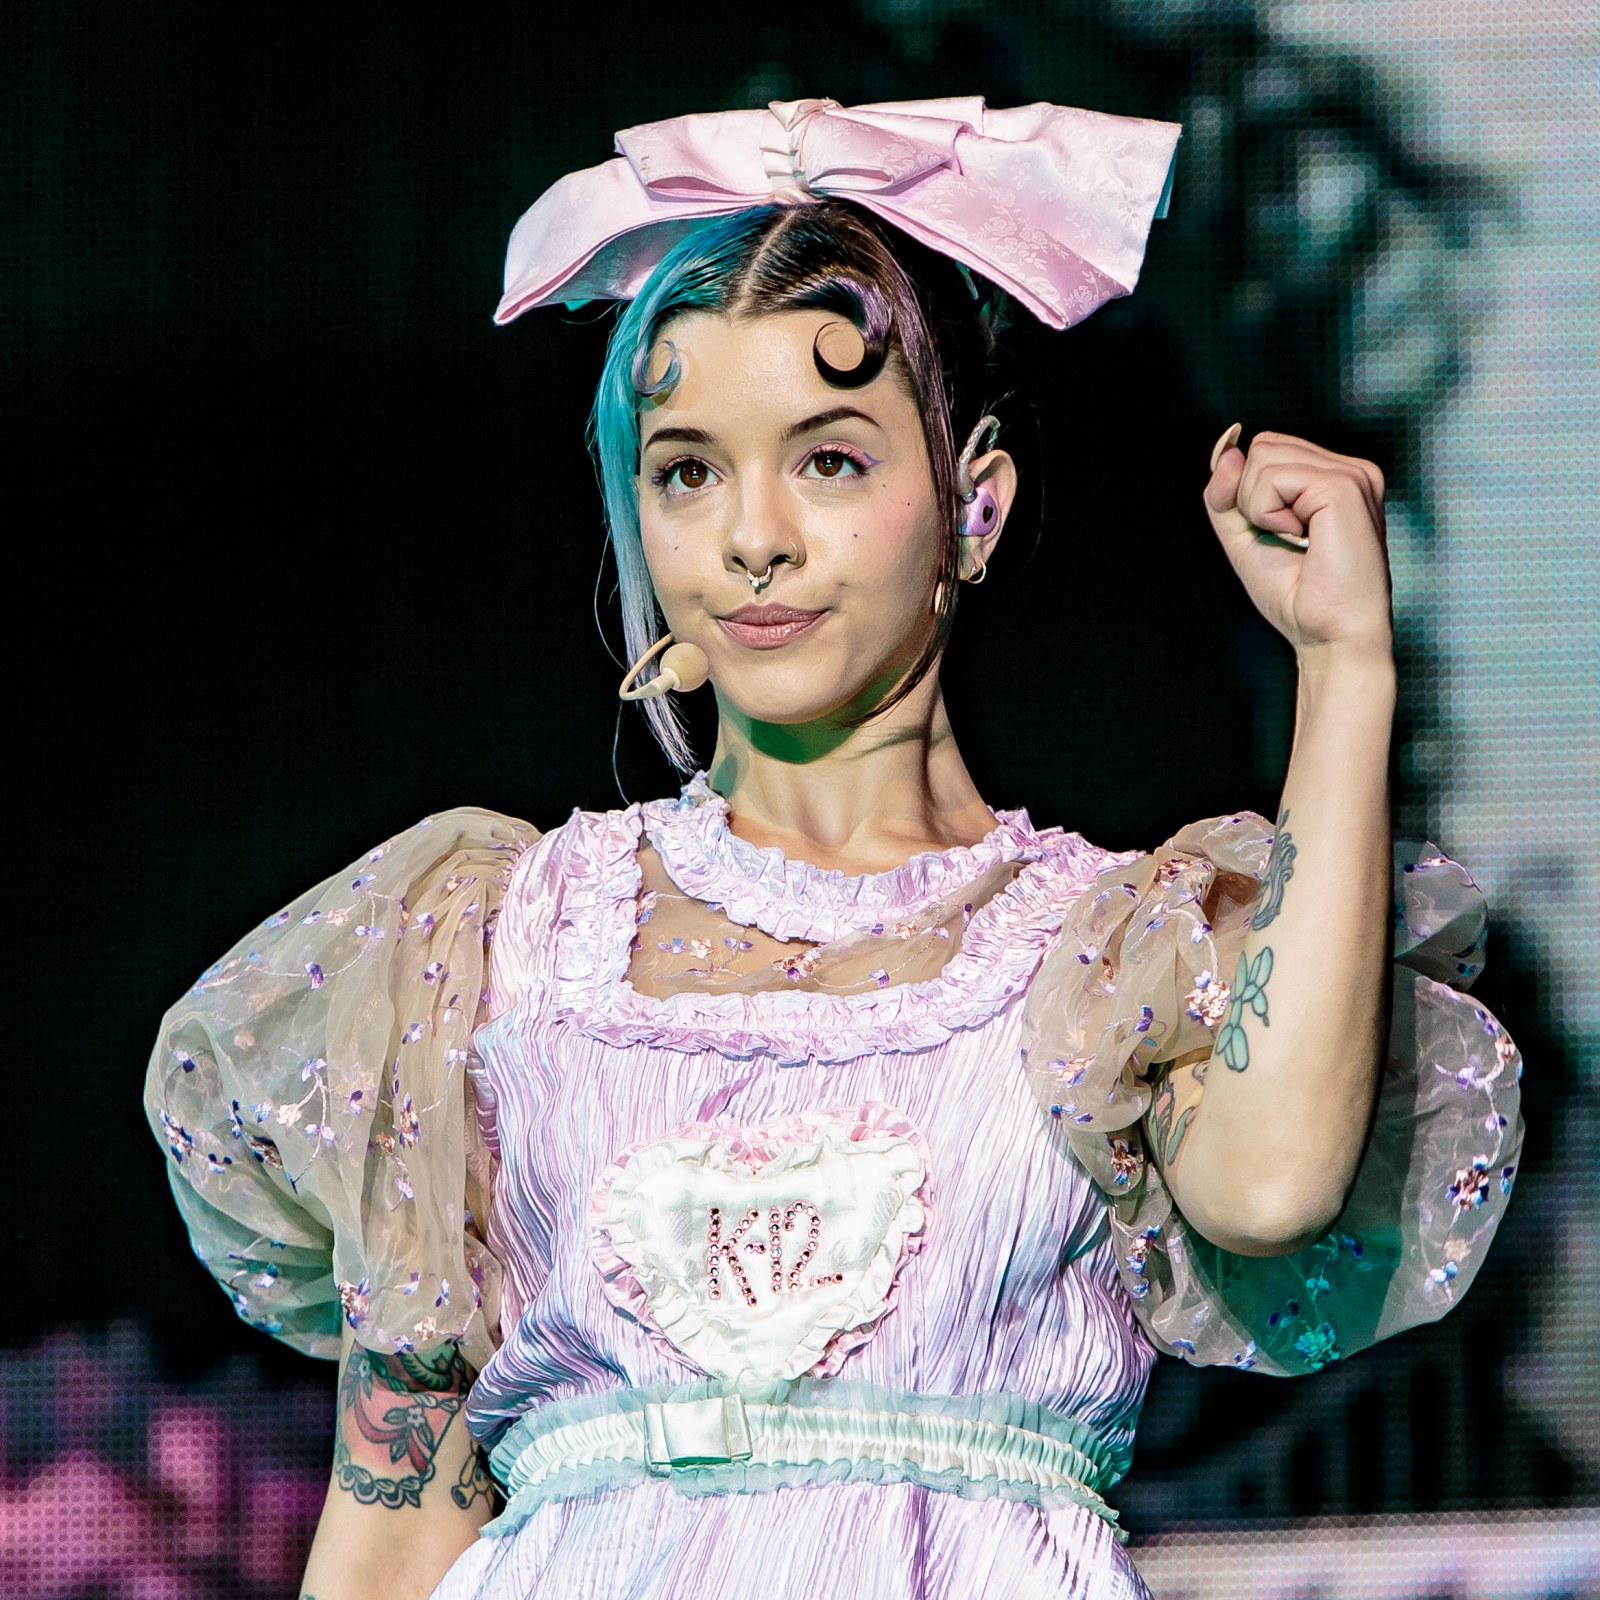 Melanie Martinez Mic Cuts Out During Concert As Palestinian Flag Raised